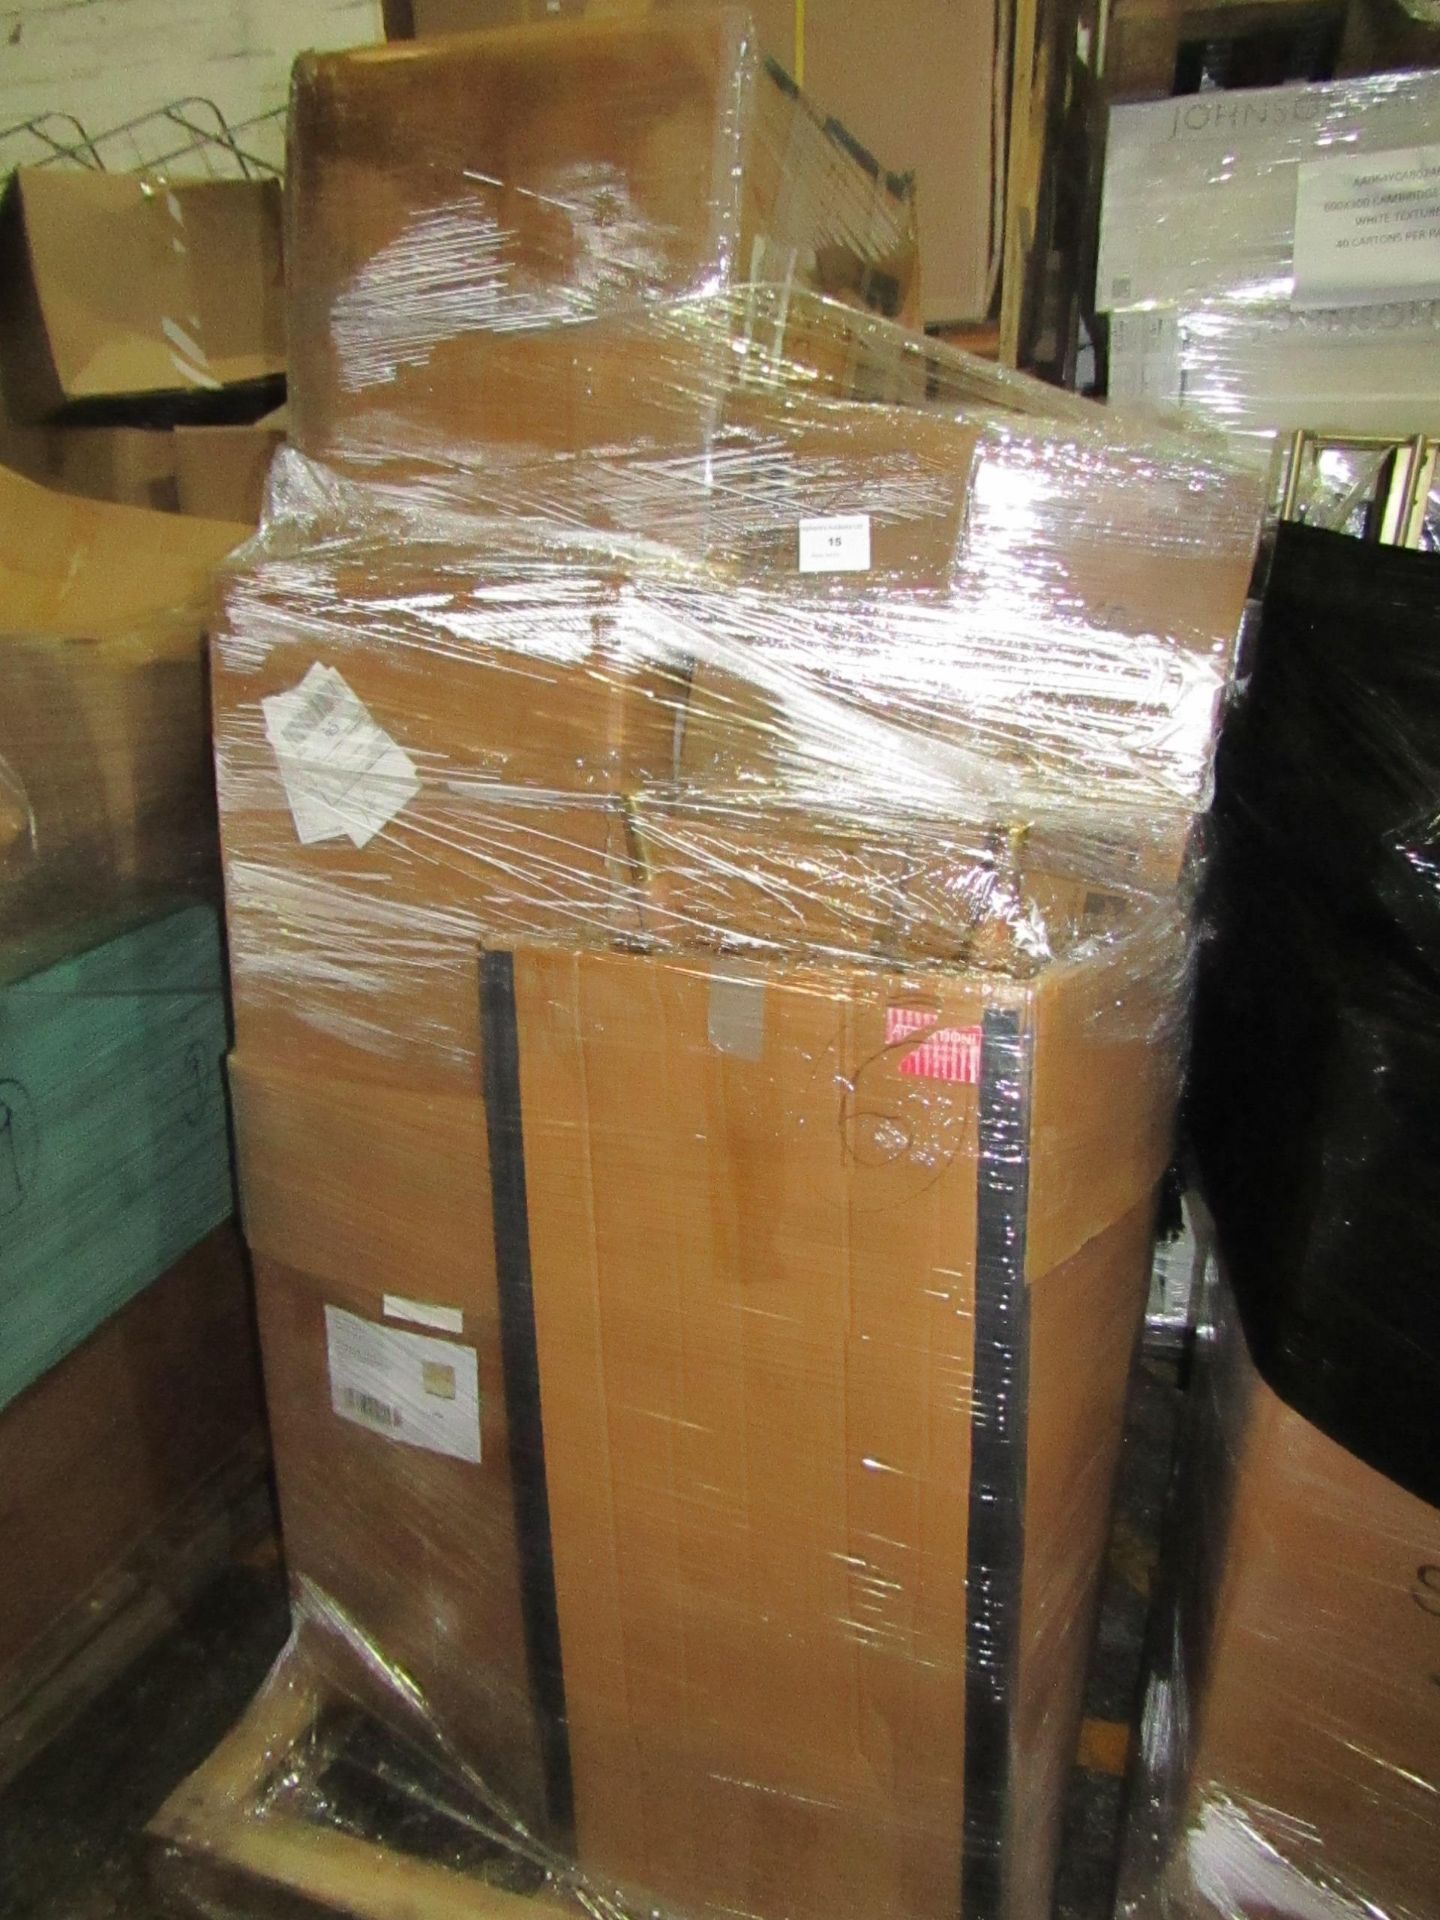 | 1x | PALLET OF SWOON B.E.R AND AWAITING PARTS FURNITURE ITEMS WHICH COULD INCLUDE ANYTHING FROM